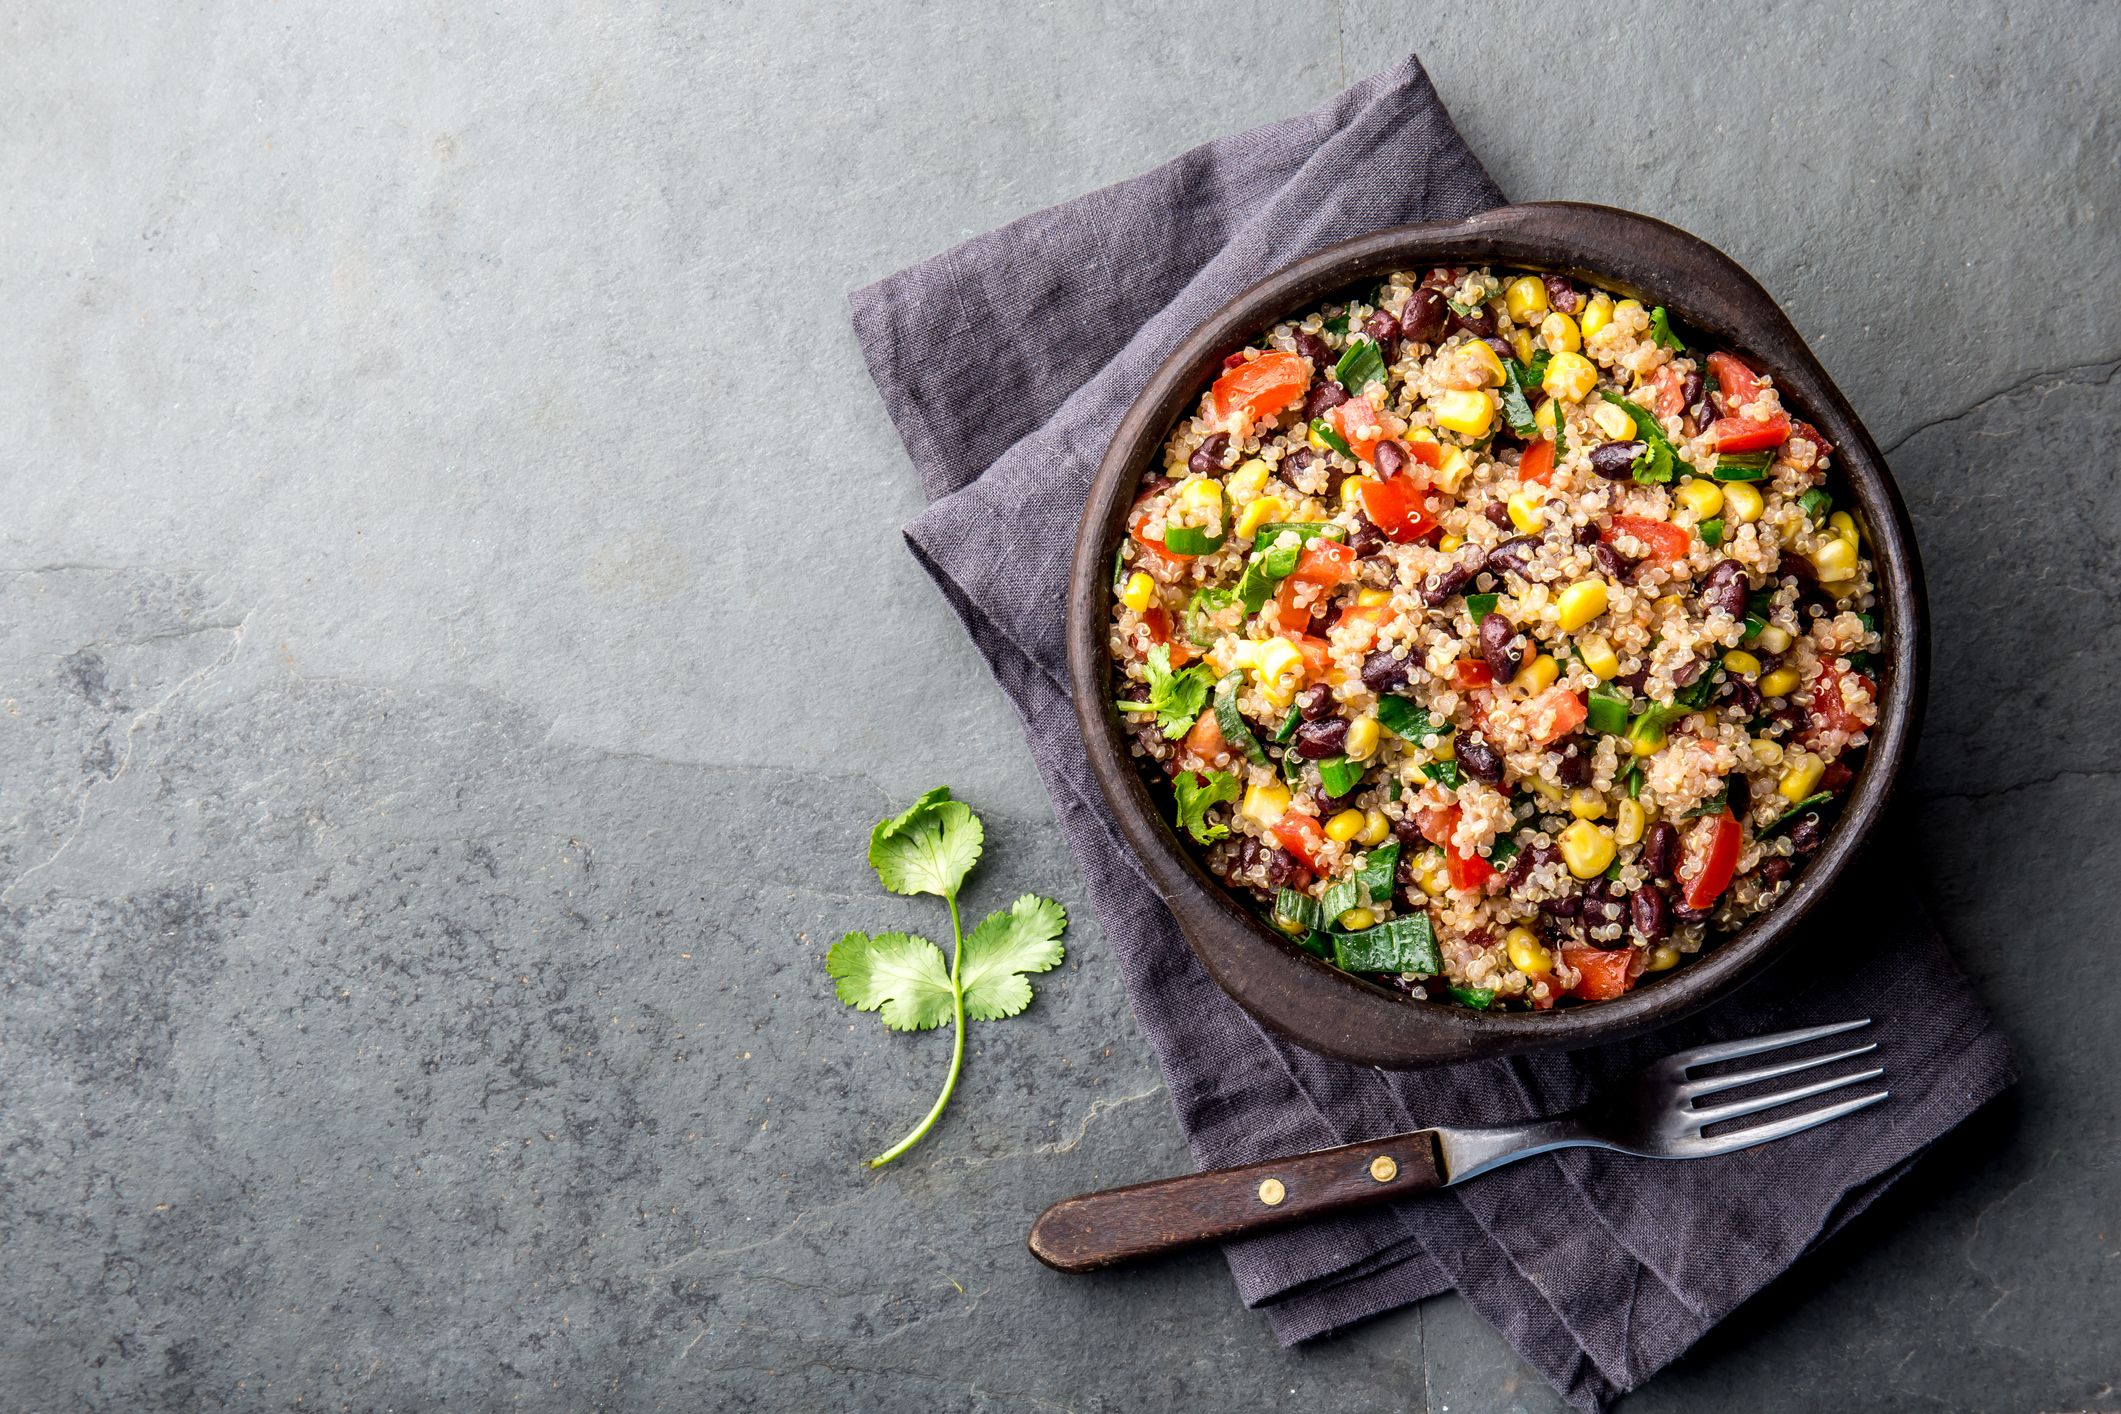 https://hips.hearstapps.com/hmg-prod/images/mexican-black-bean-corn-quinoa-salad-in-clay-bowl-royalty-free-image-1701015795.jpg